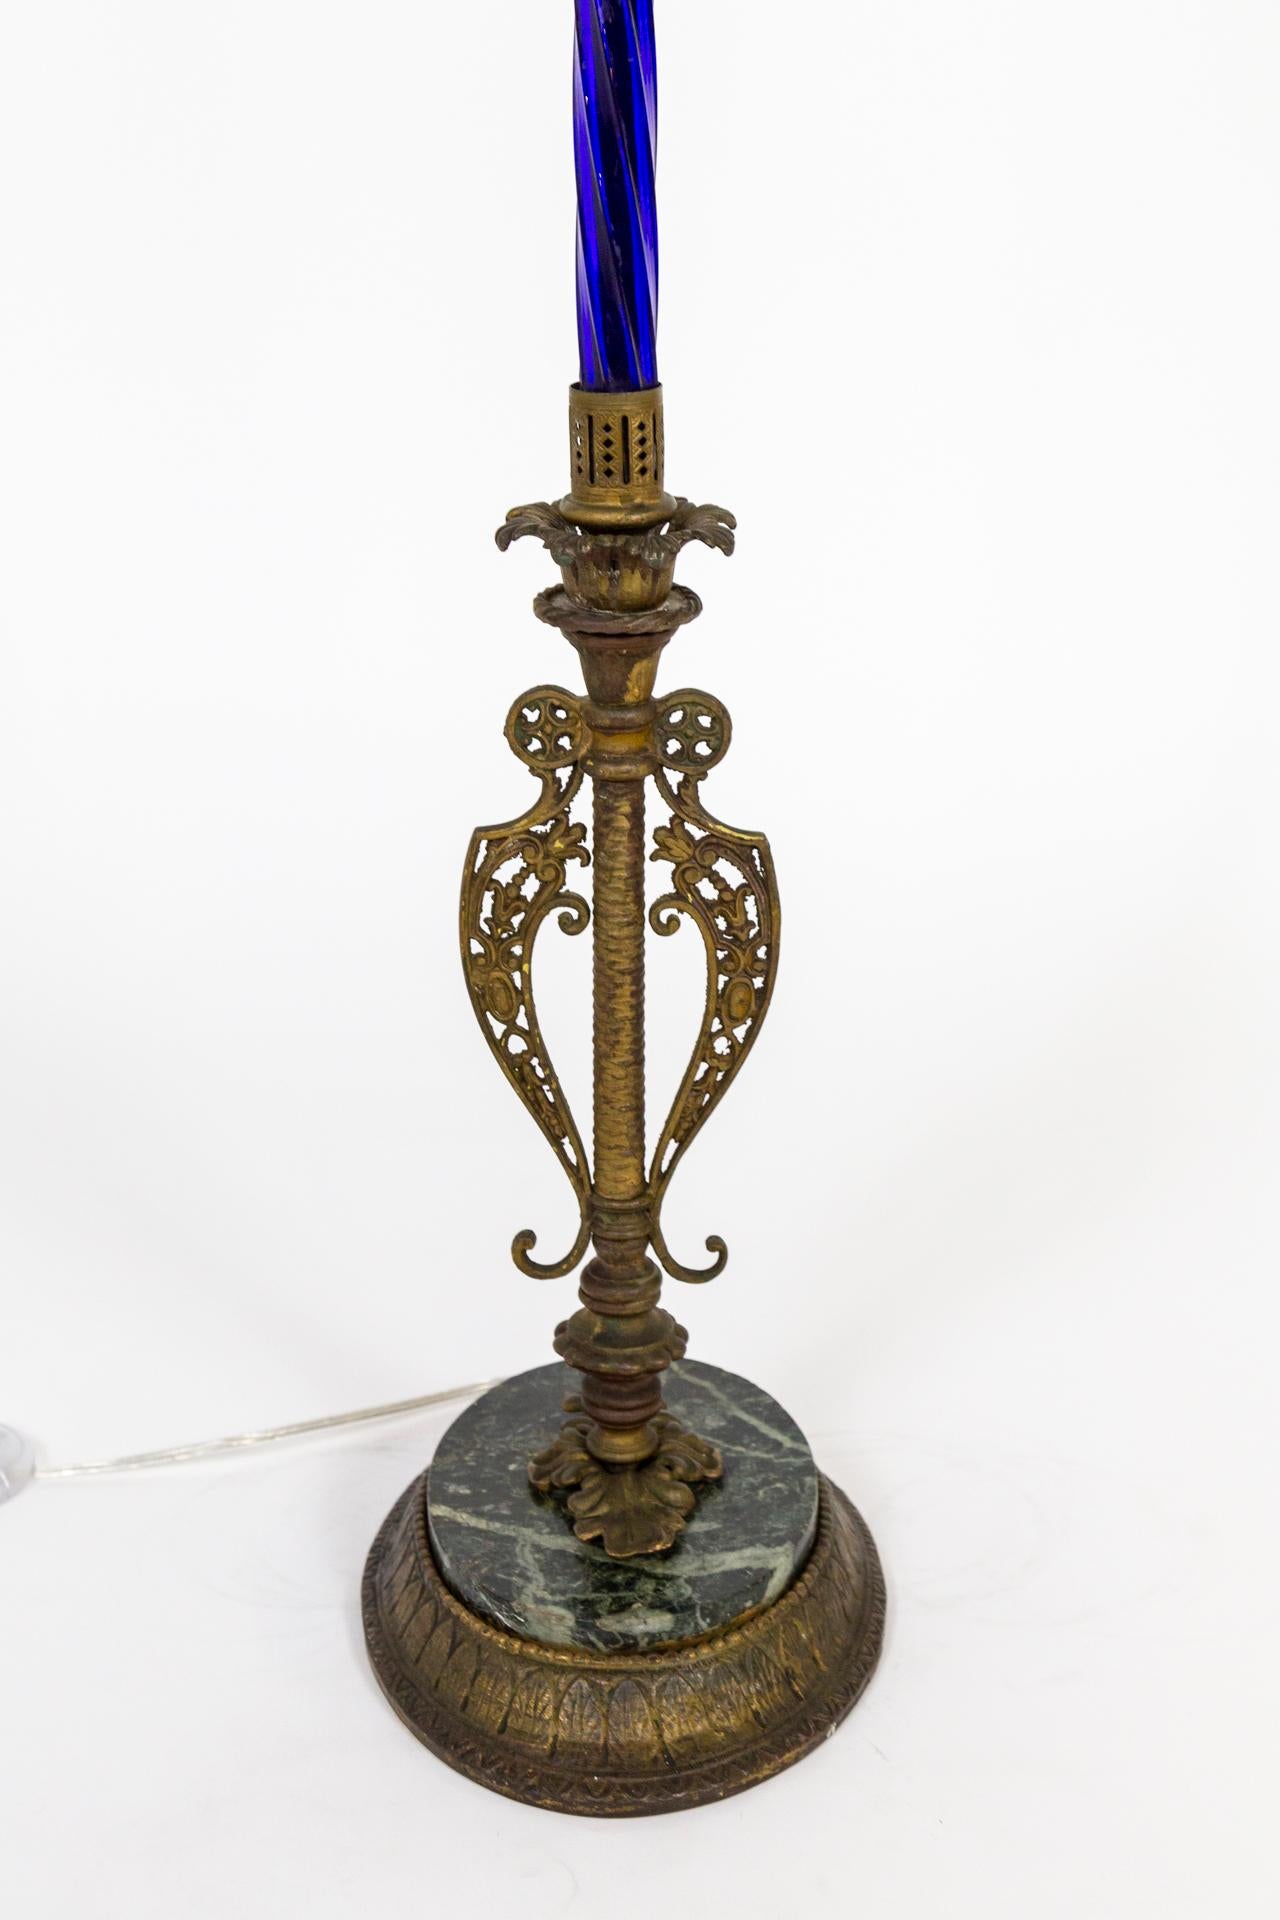 High Victorian, Anglo-Indian inspired floor lamp on an oval base of cast brass and marble.
The main body is striking, 24